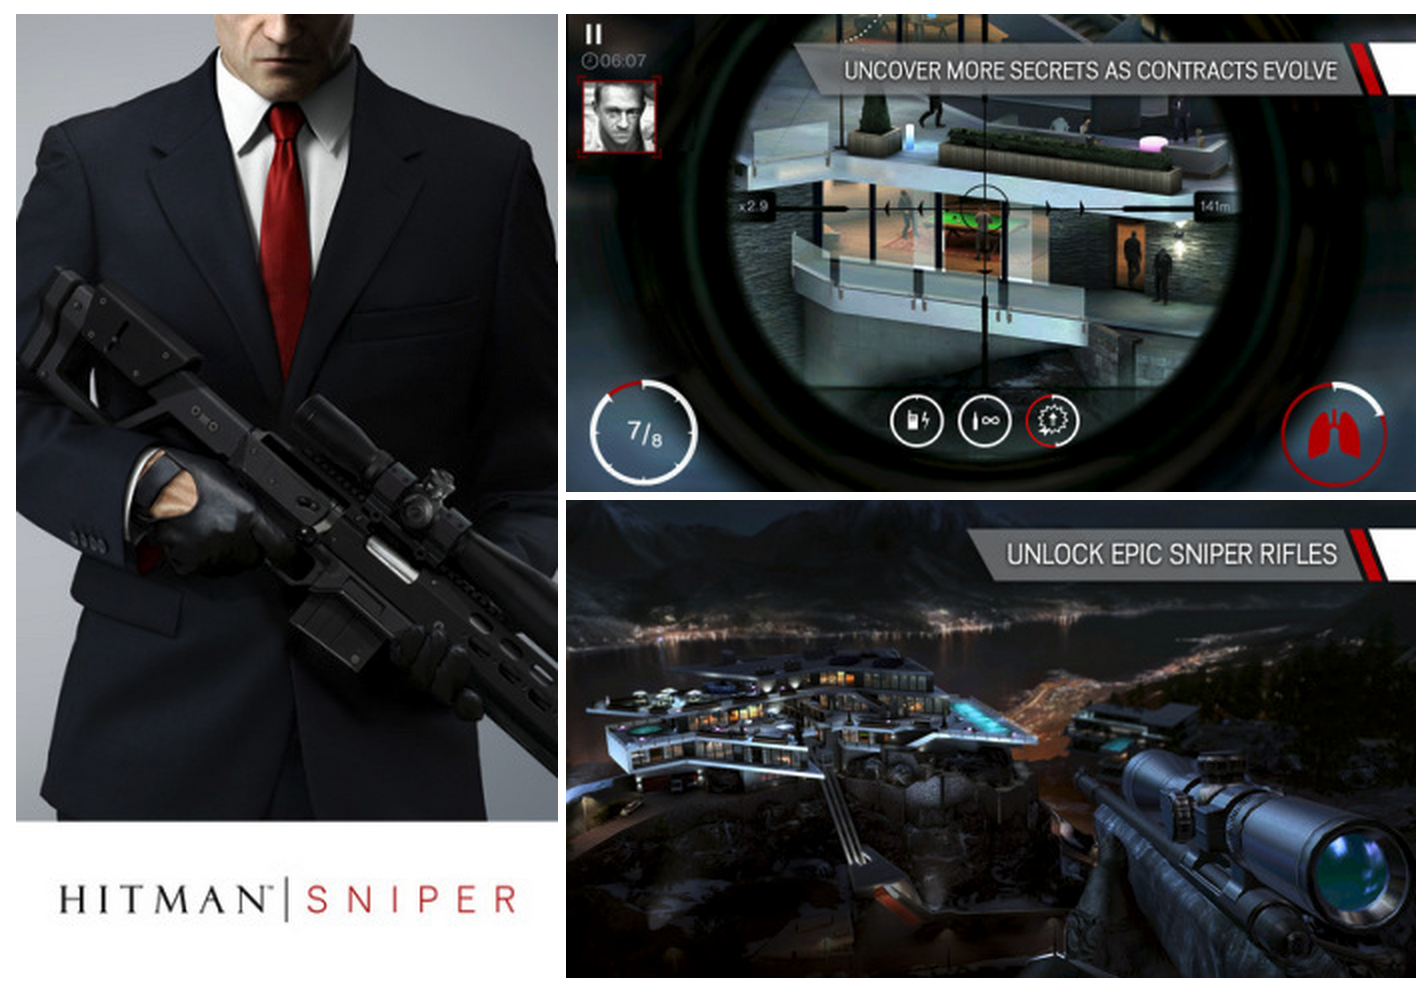 Agent 47 returns to iOS with the new Hitman Sniper game ...